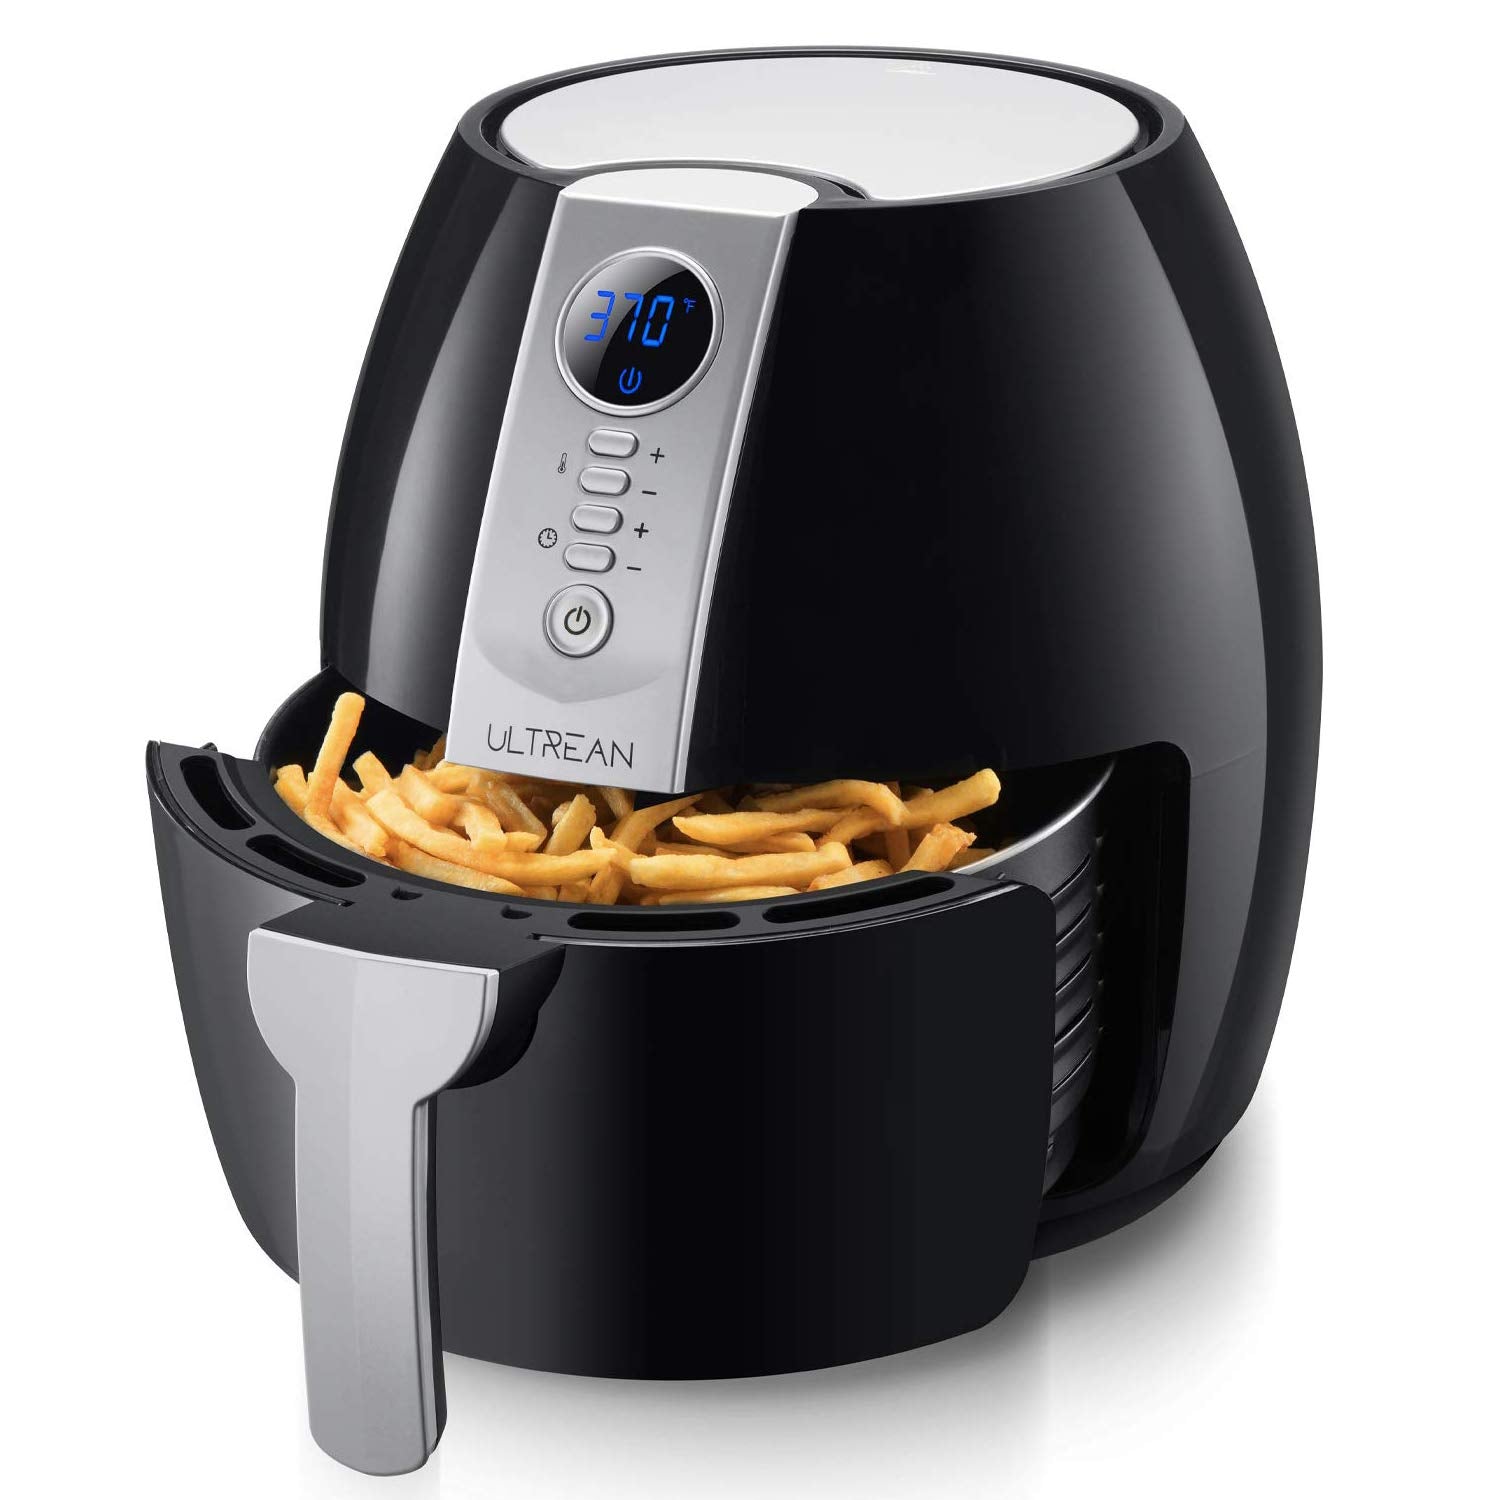 LATURE 4.2 QT Air Fryer Oven Cooker with Temperature and Time